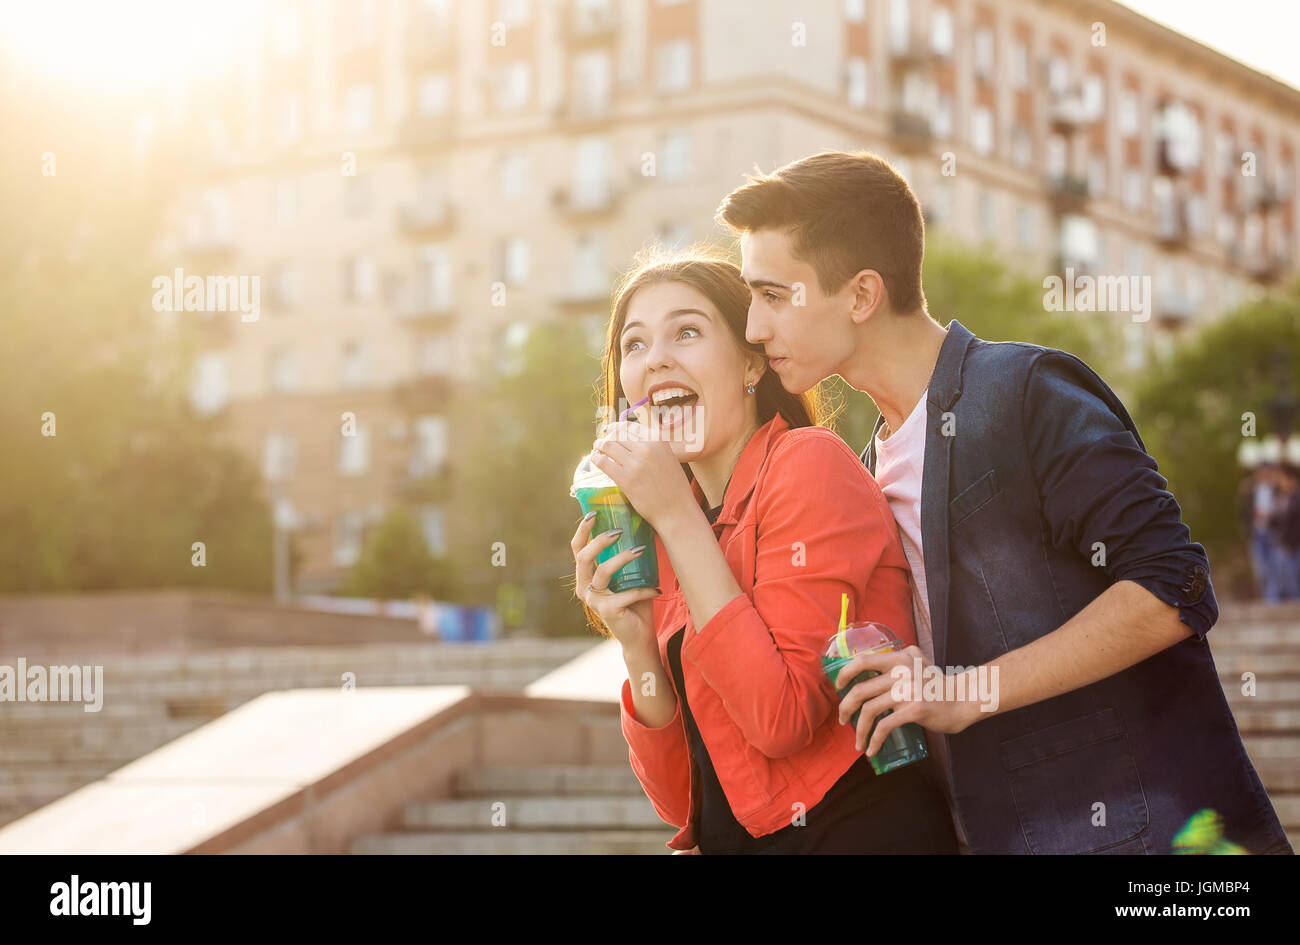 Teenagers drink fruit fresh from glasses. They are happy. A couple in love on a date. Romance of first love. Stock Photo